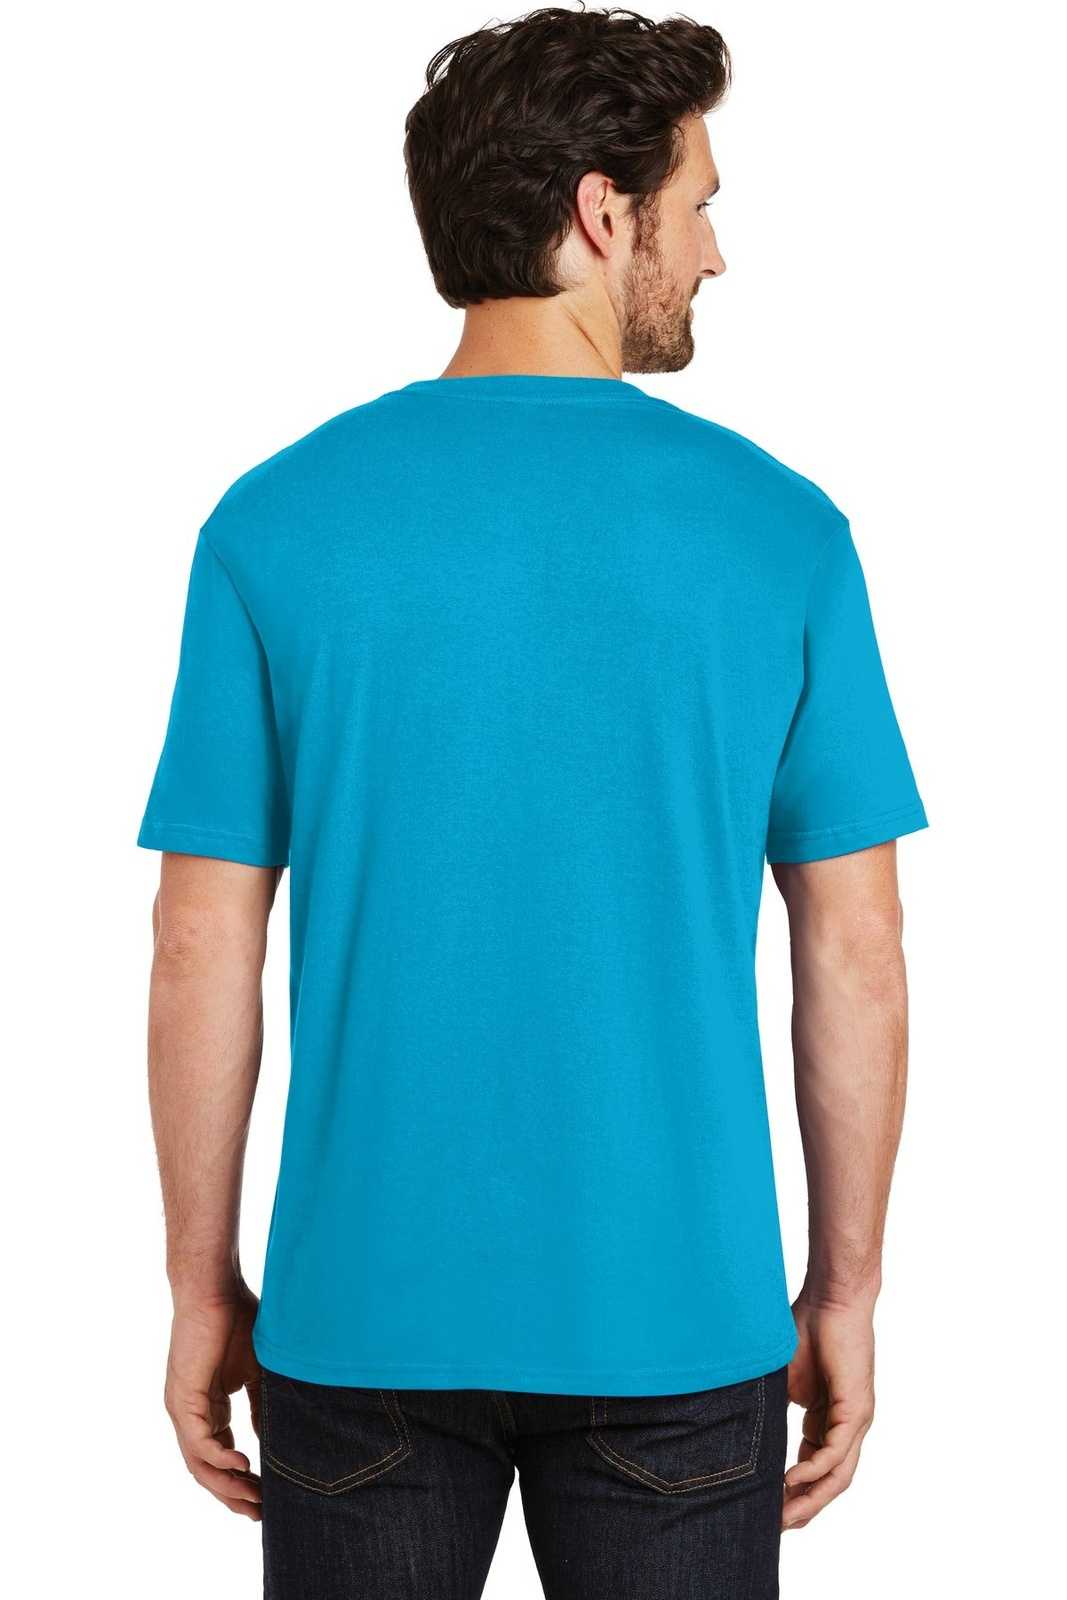 District DT104 Perfect Weight Tee - Bright Turquoise - HIT a Double - 2